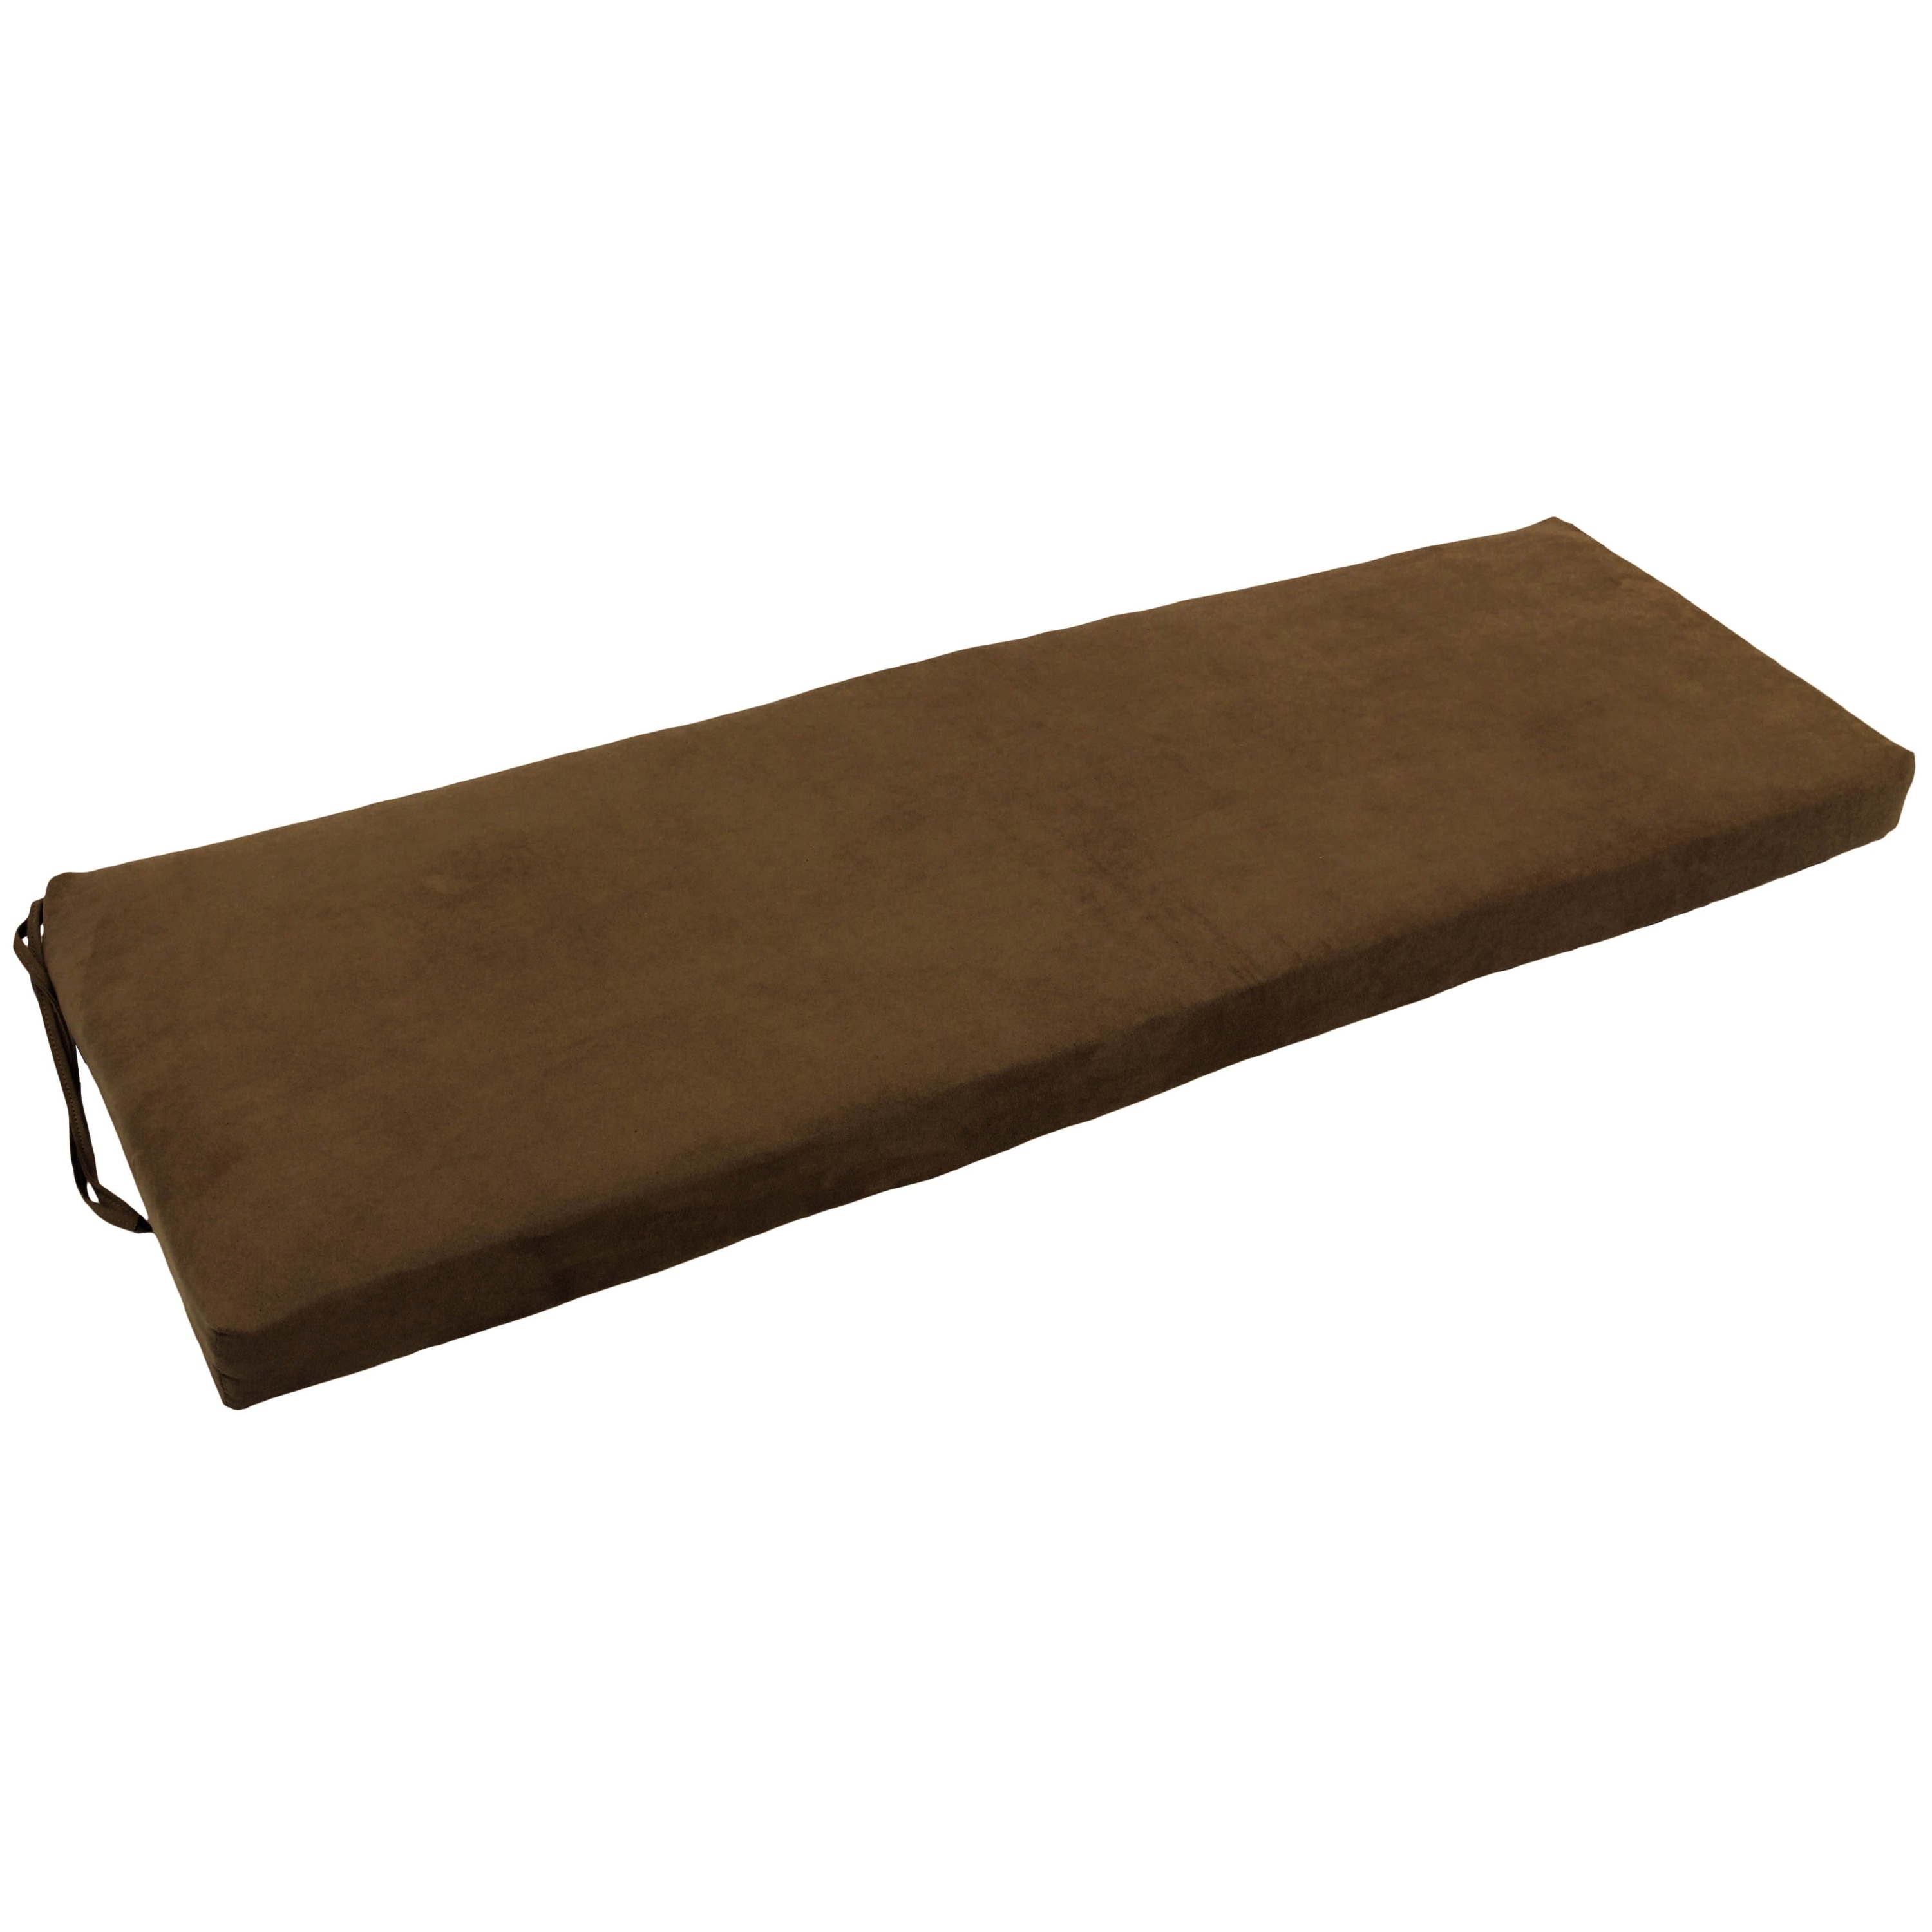 Microsuede Indoor Bench Cushion (48-, 51-, or 54-inches wide) - On